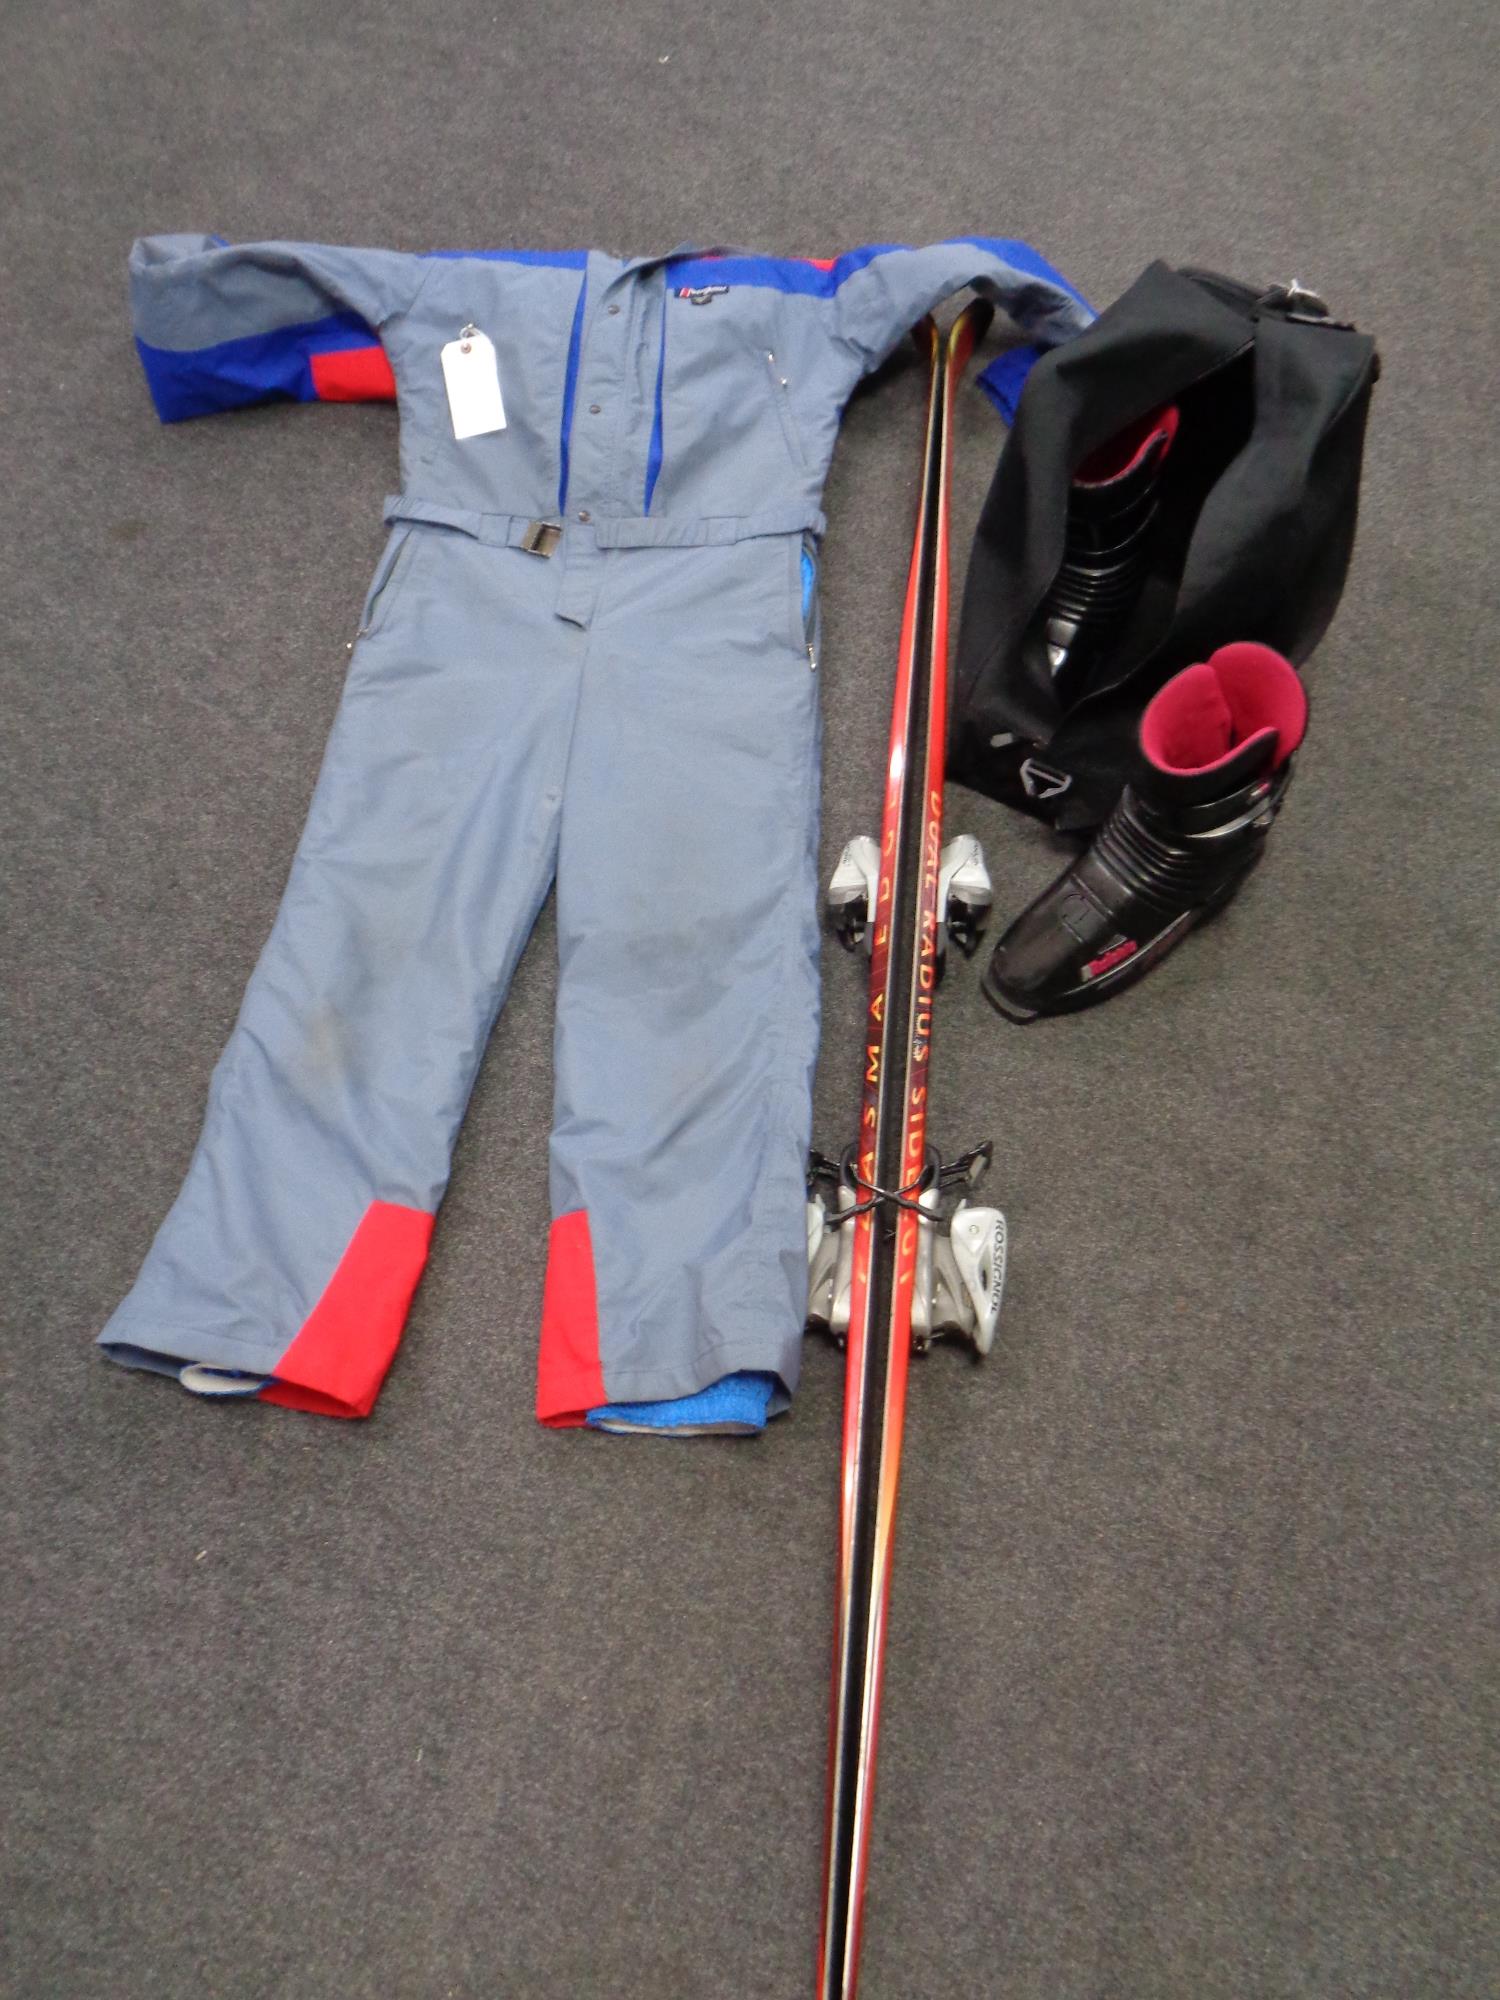 A pair of Fischer XTR 190 skis with bindings together with a pair of R Raichle ski boots, size 8.